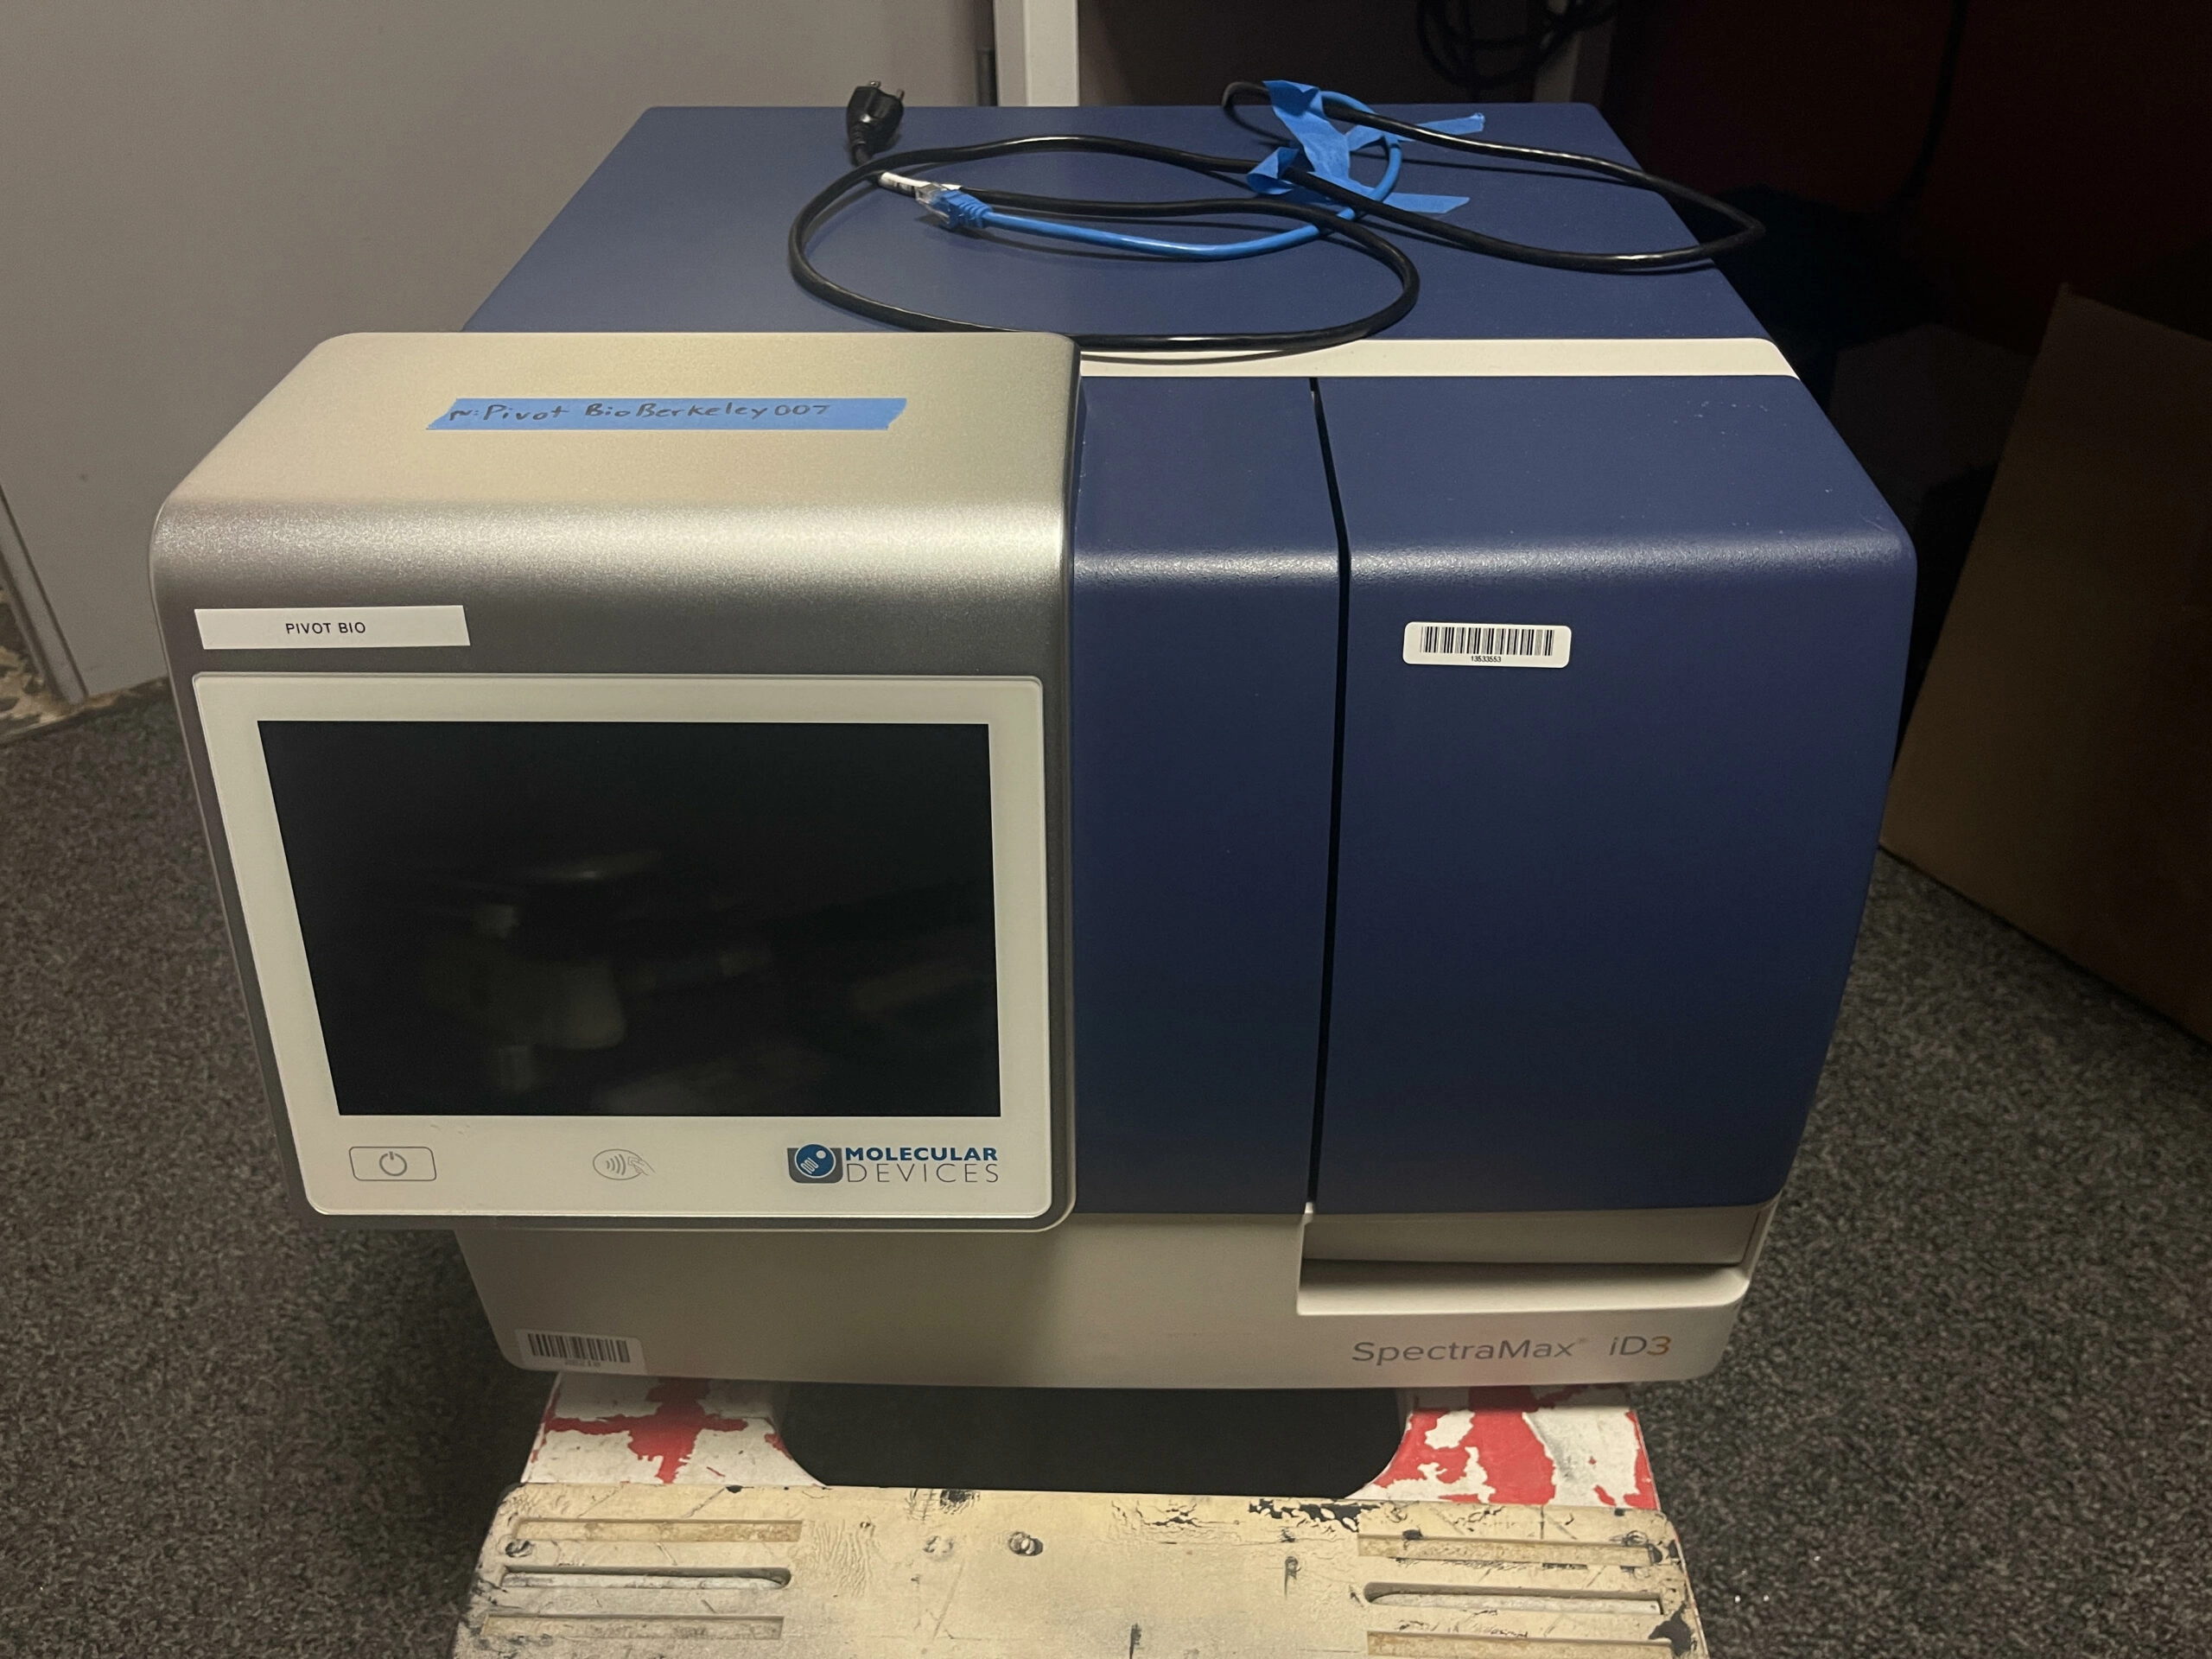 Molecular Devices SpectraMax iD3 Microplate Reader